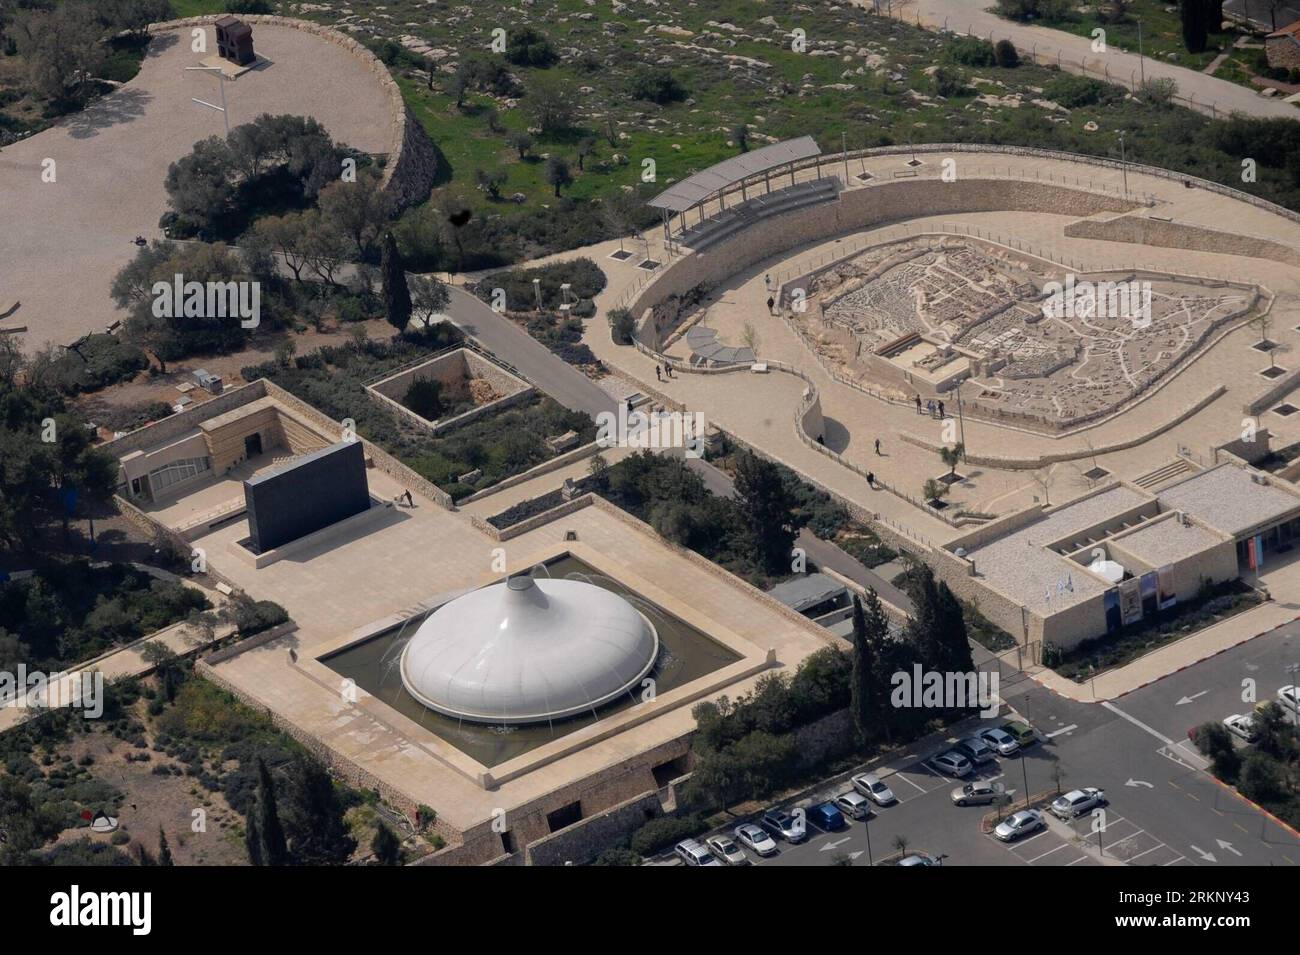 Bildnummer: 57690412  Datum: 27.03.2012  Copyright: imago/Xinhua (120326)-- JERUSALEM, March 26, 2012 (Xinhua) -- Photo taken on March 26, 2012 shows the bird s-eye view of the old city of Jerusalem. Jerusalem is located in the Judean Mountains between the Mediterranean Sea and the northern edge of the Dead Sea. It is a holy city to the three major religions -- Judaism, Christianity and Islam. Today, the status of Jerusalem remains on the core issues in the Israeli-Palestinian conflict. (Xinhua/Yin Dongxun) MIDEAST-JERUSALEM-AERIAL VIEW PUBLICATIONxNOTxINxCHN Gesellschaft Luftaufnahme Totale L Stock Photo